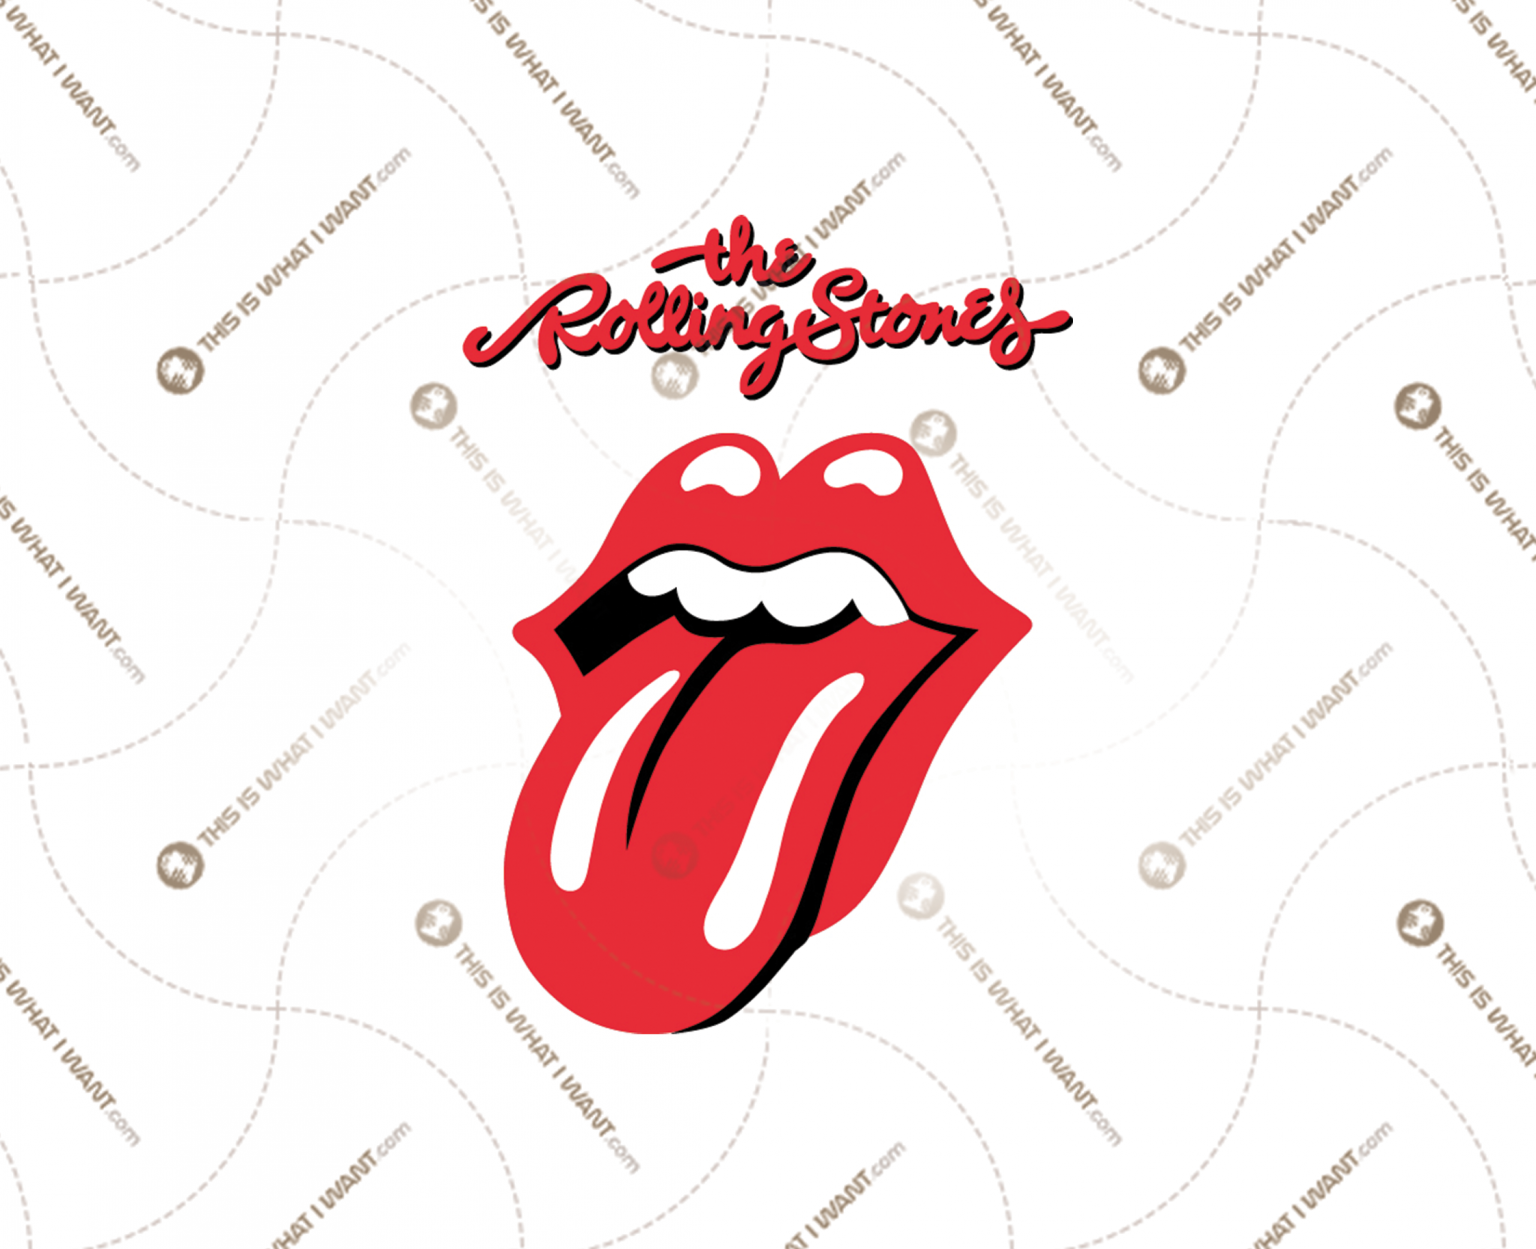 Rolling Stone Logo Inspired Printable Art Design - Original Style With